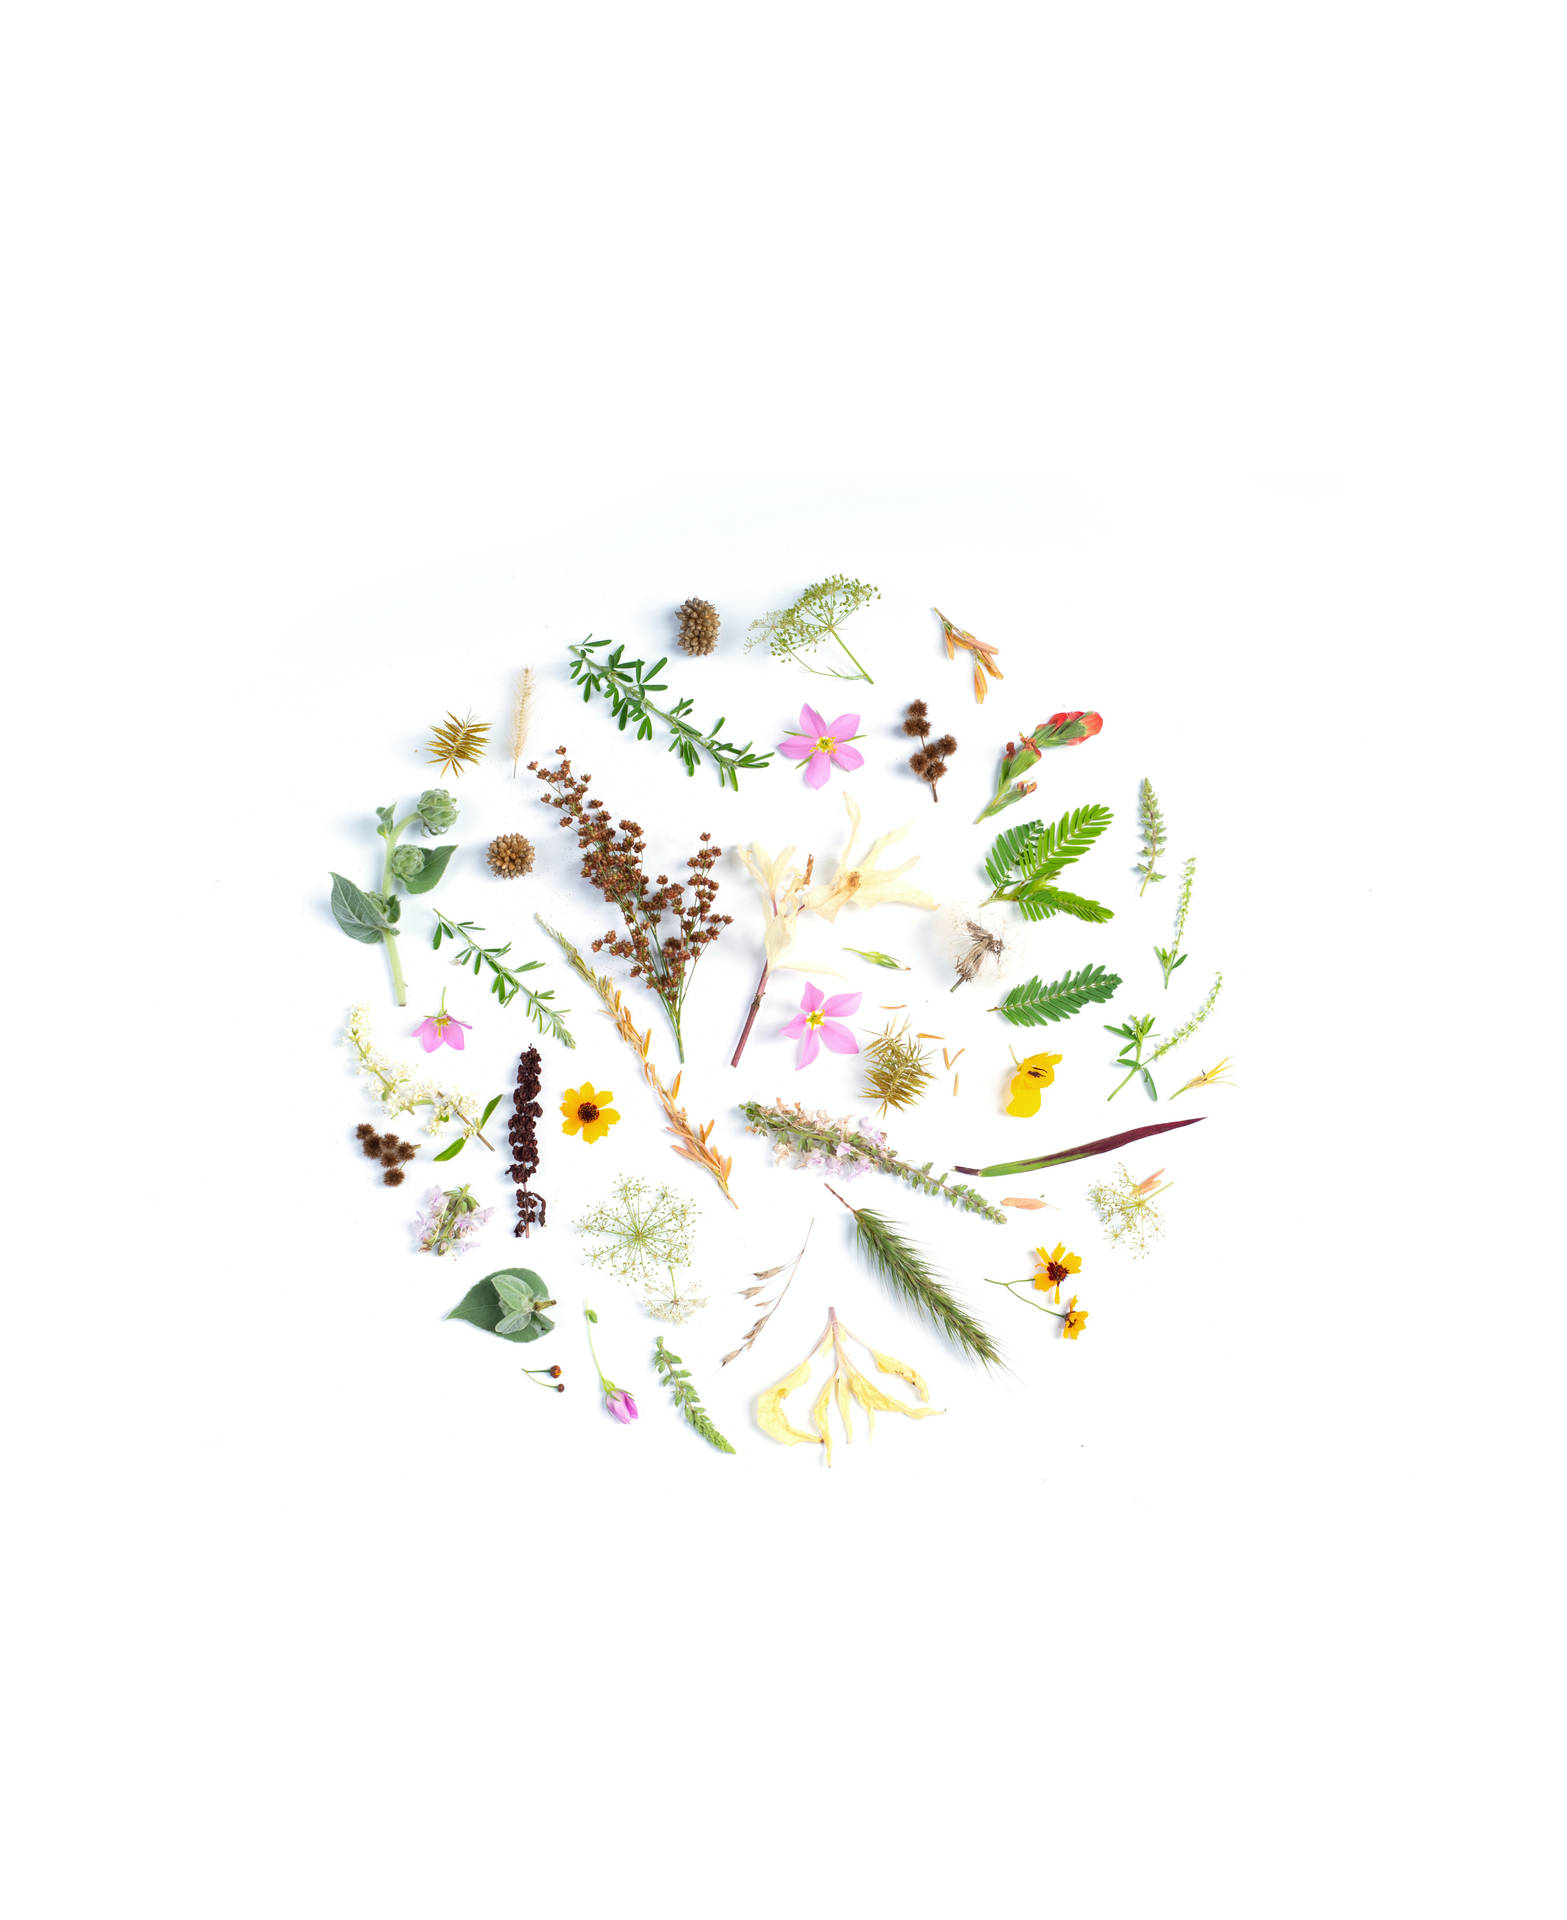 Small Flowers On White Background